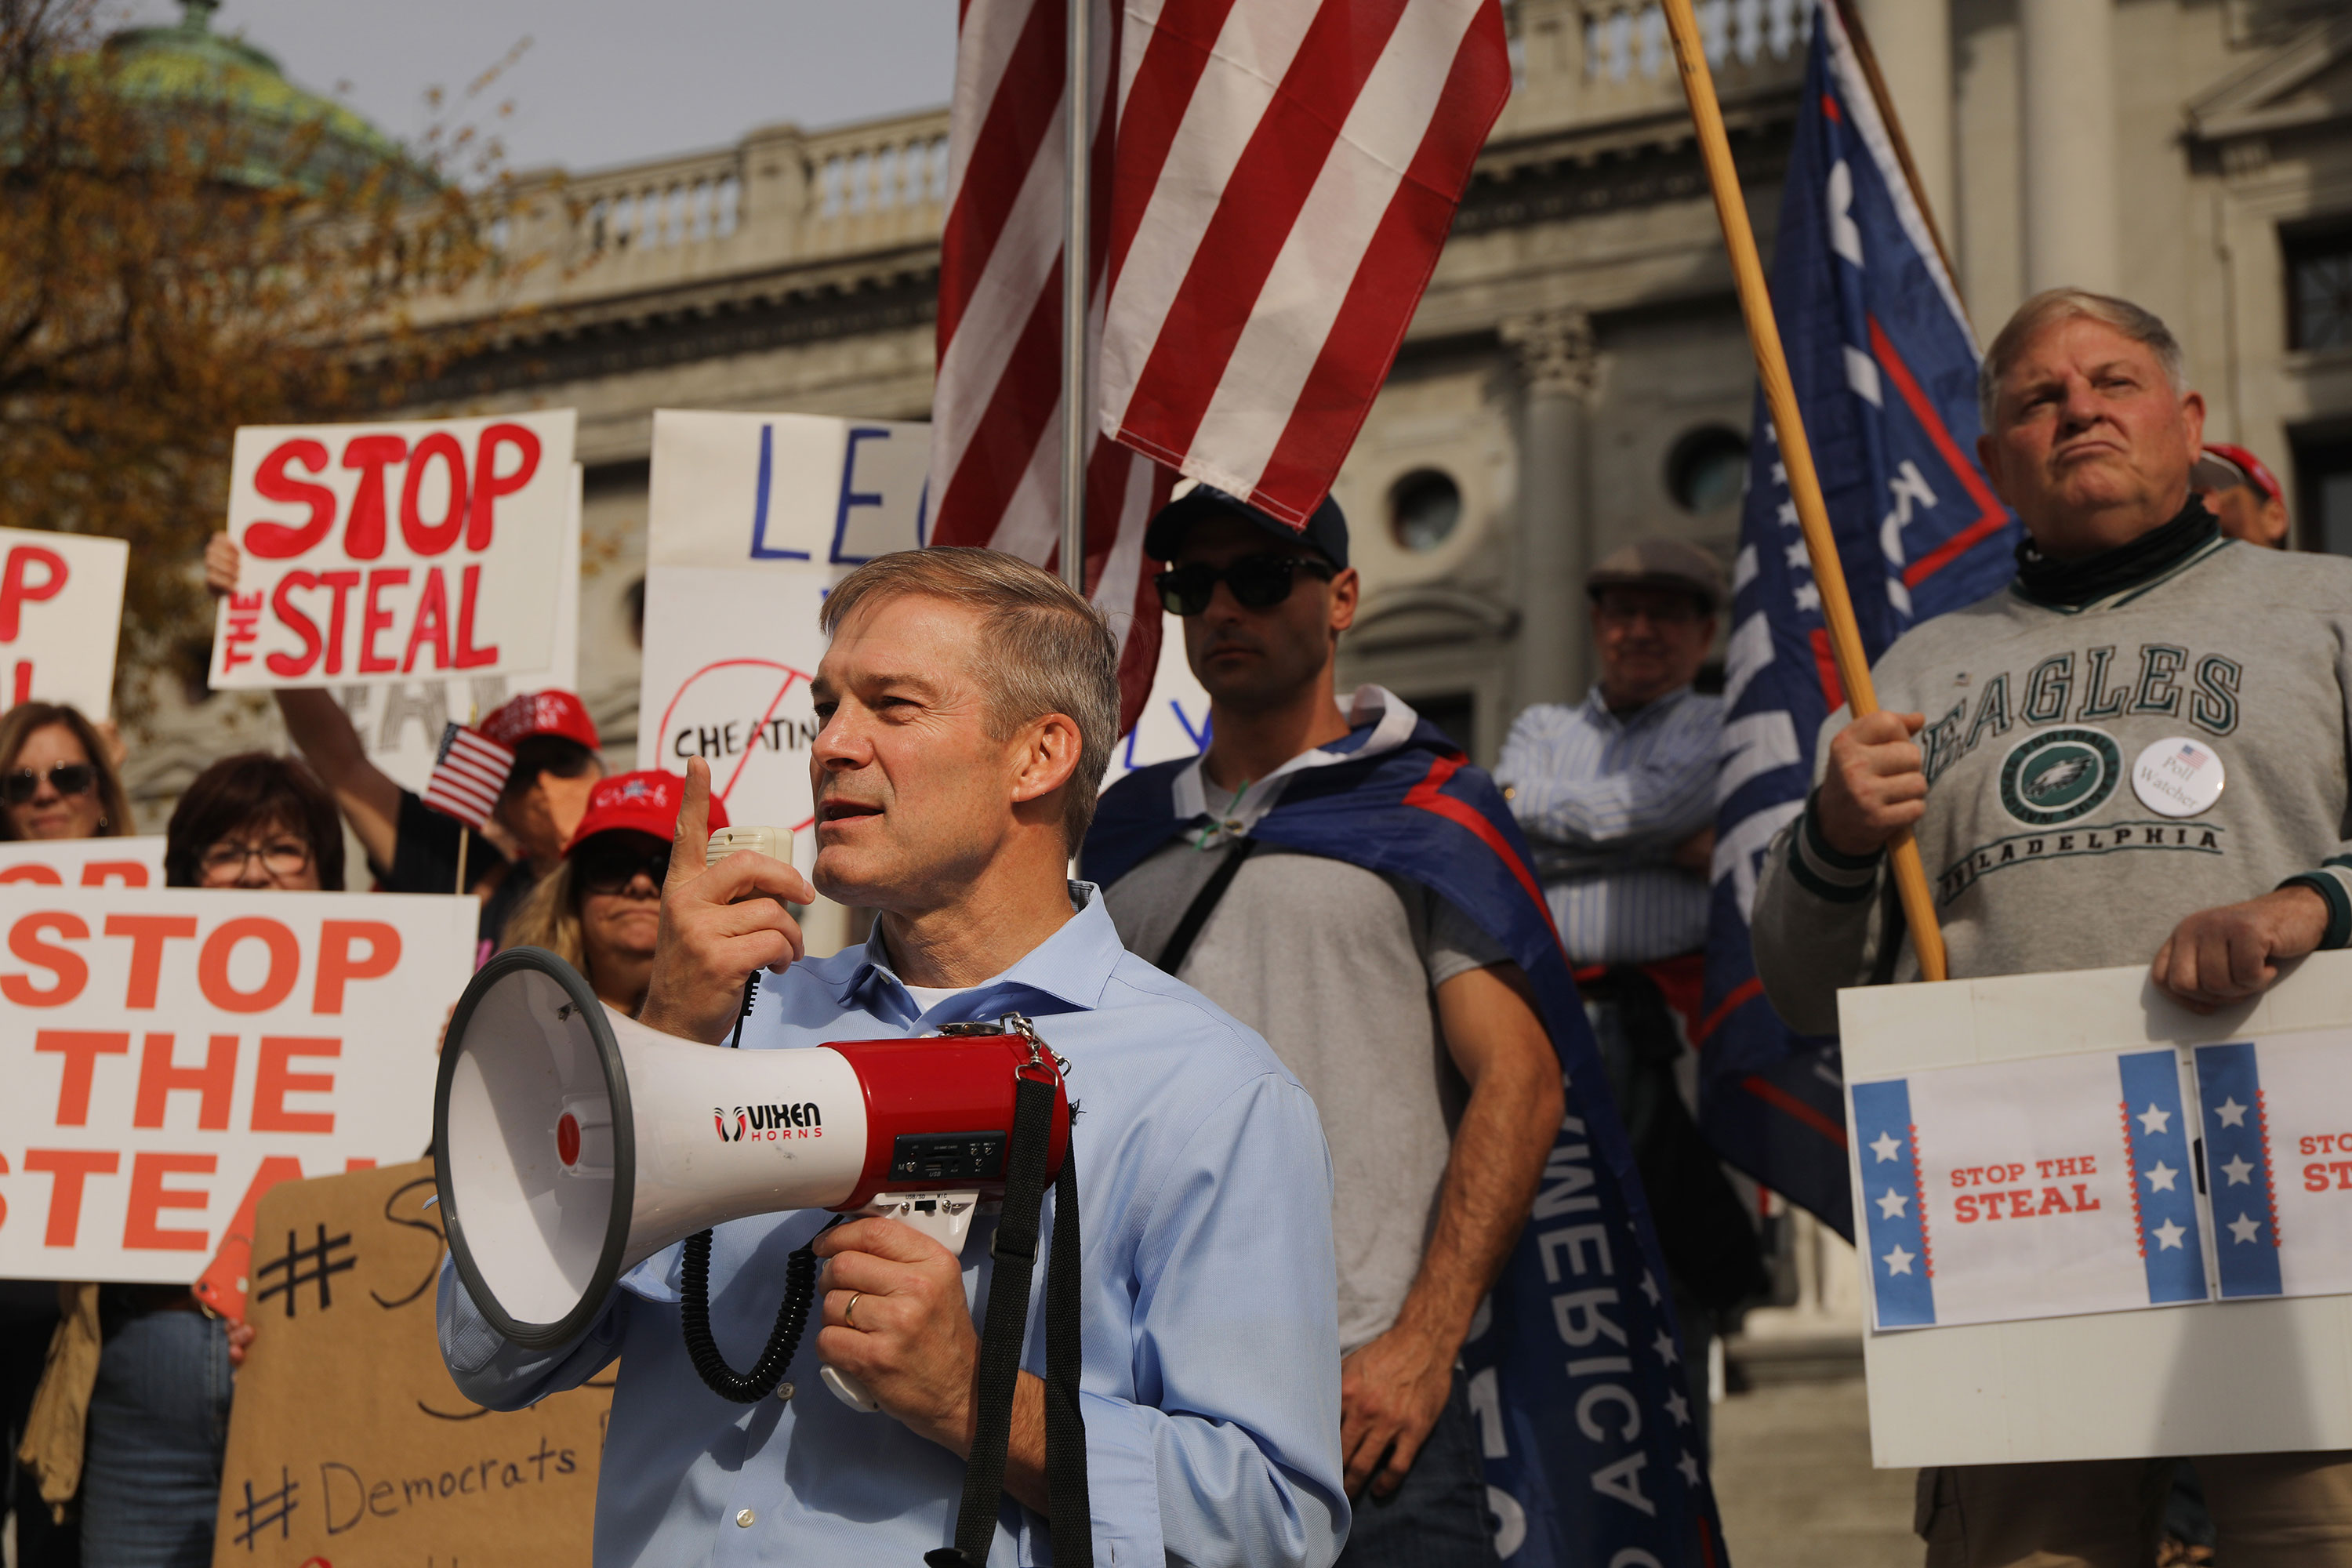 GOP Rep. Jim Jordan stands with dozens of people calling for stopping the vote count in Pennsylvania due to alleged fraud against former President Donald Trump on the steps of the Pennsylvania state capital in Harrisburg on Nov. 5, 2020.